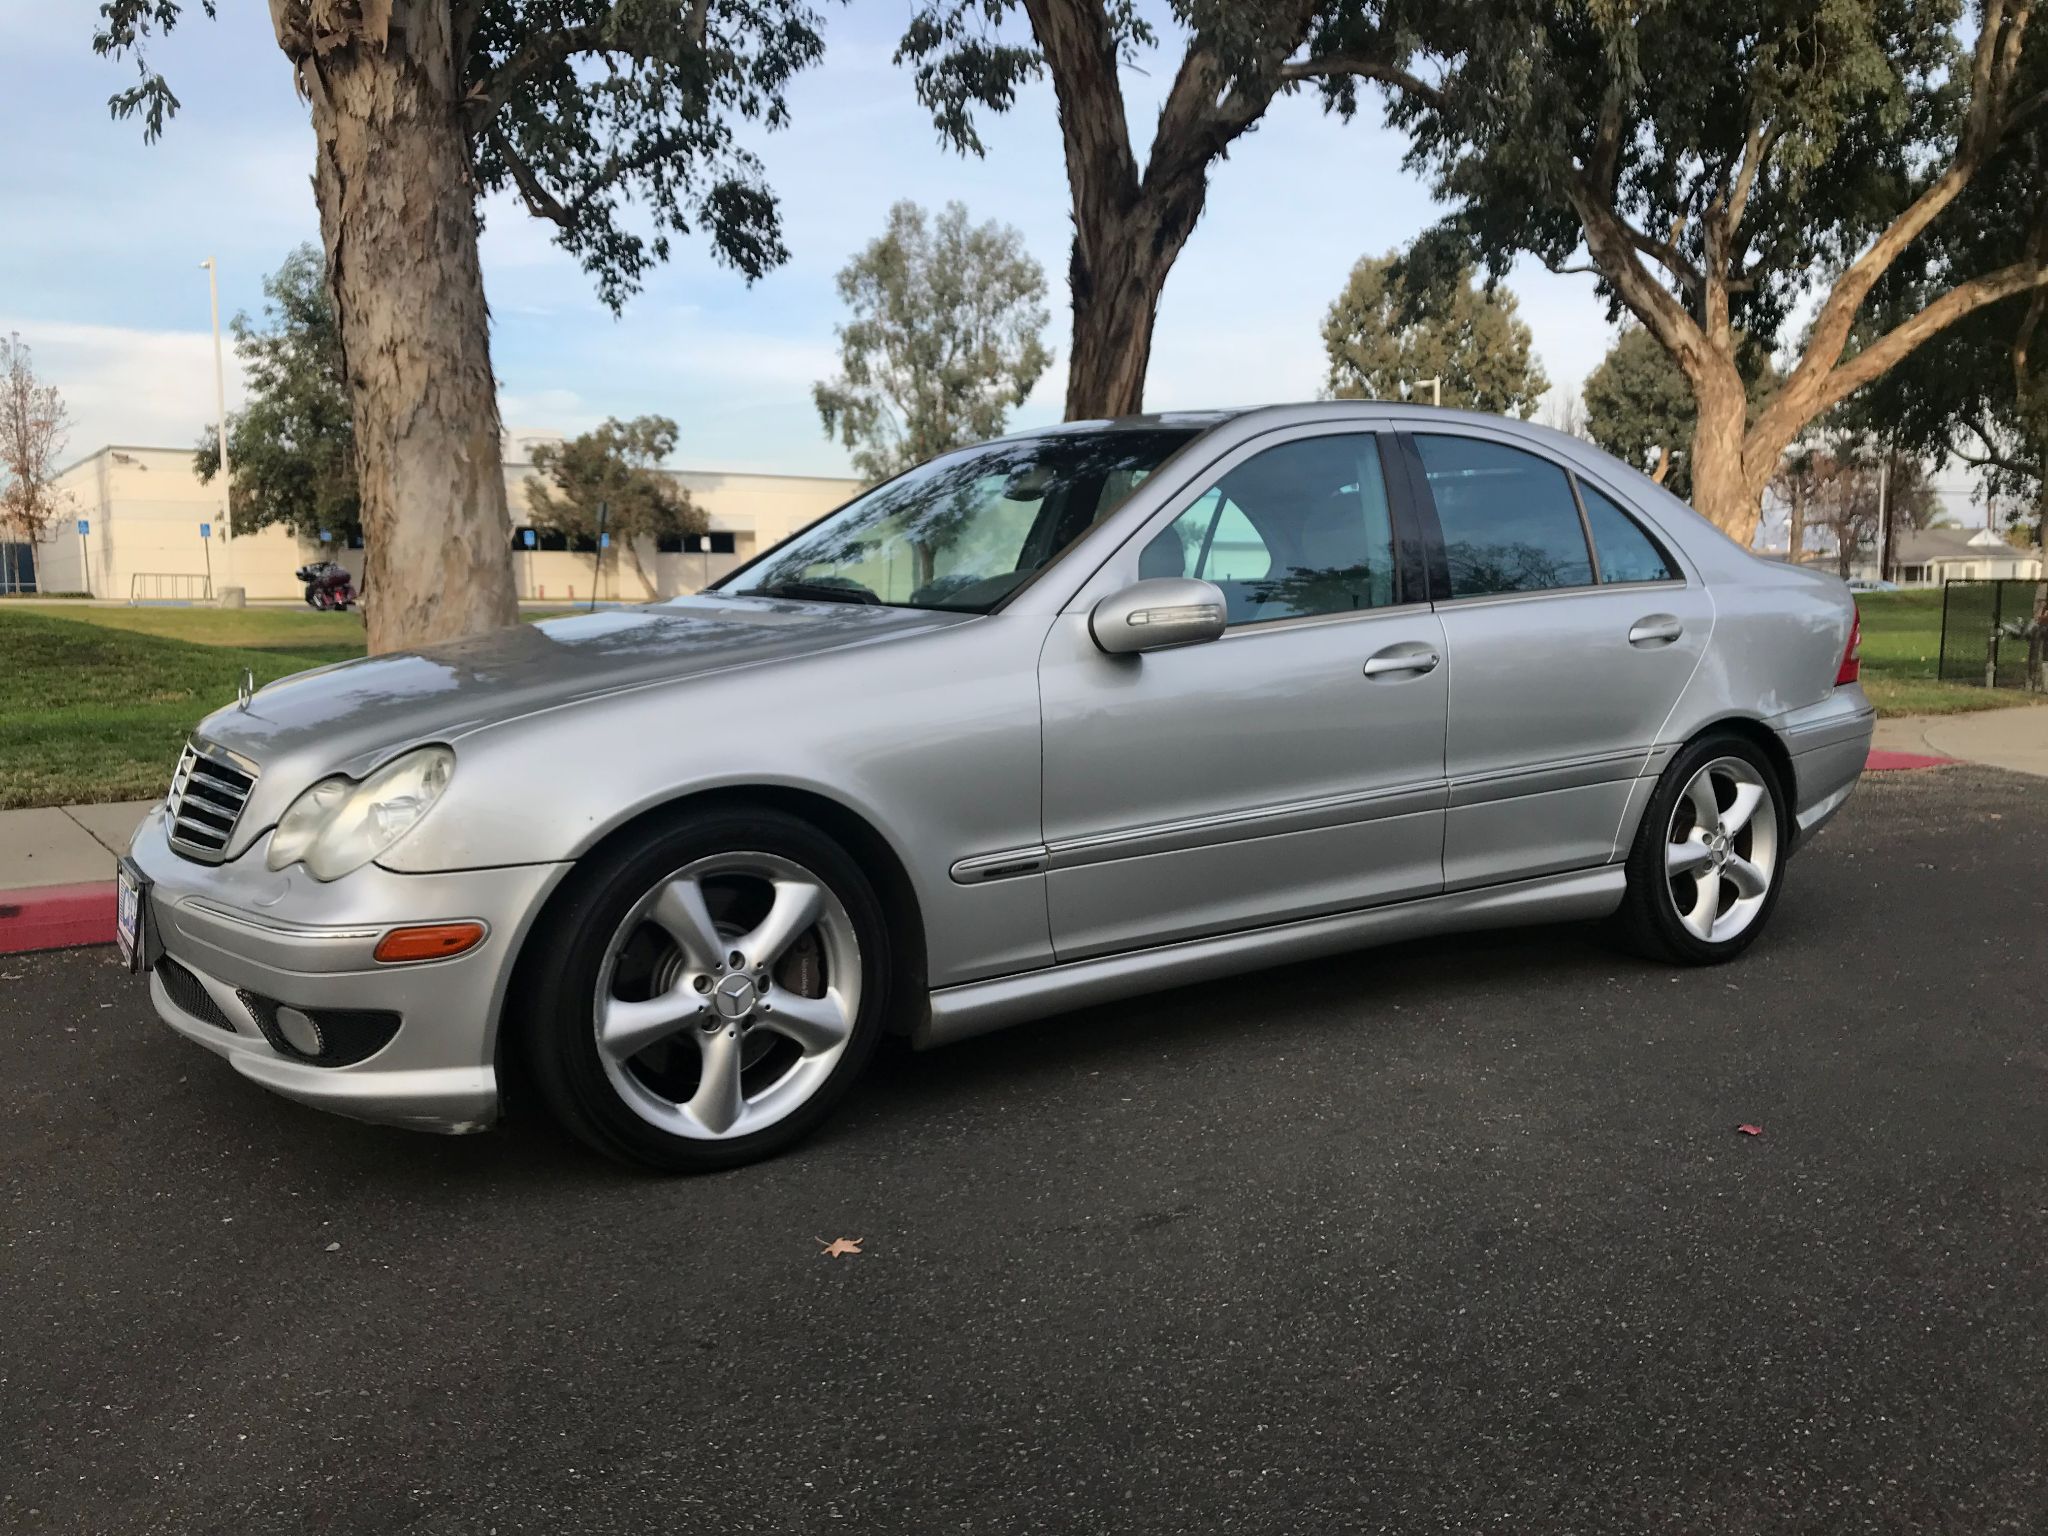 Used 2005 Mercedes-Benz C-Class 1.8L at City Cars Warehouse INC